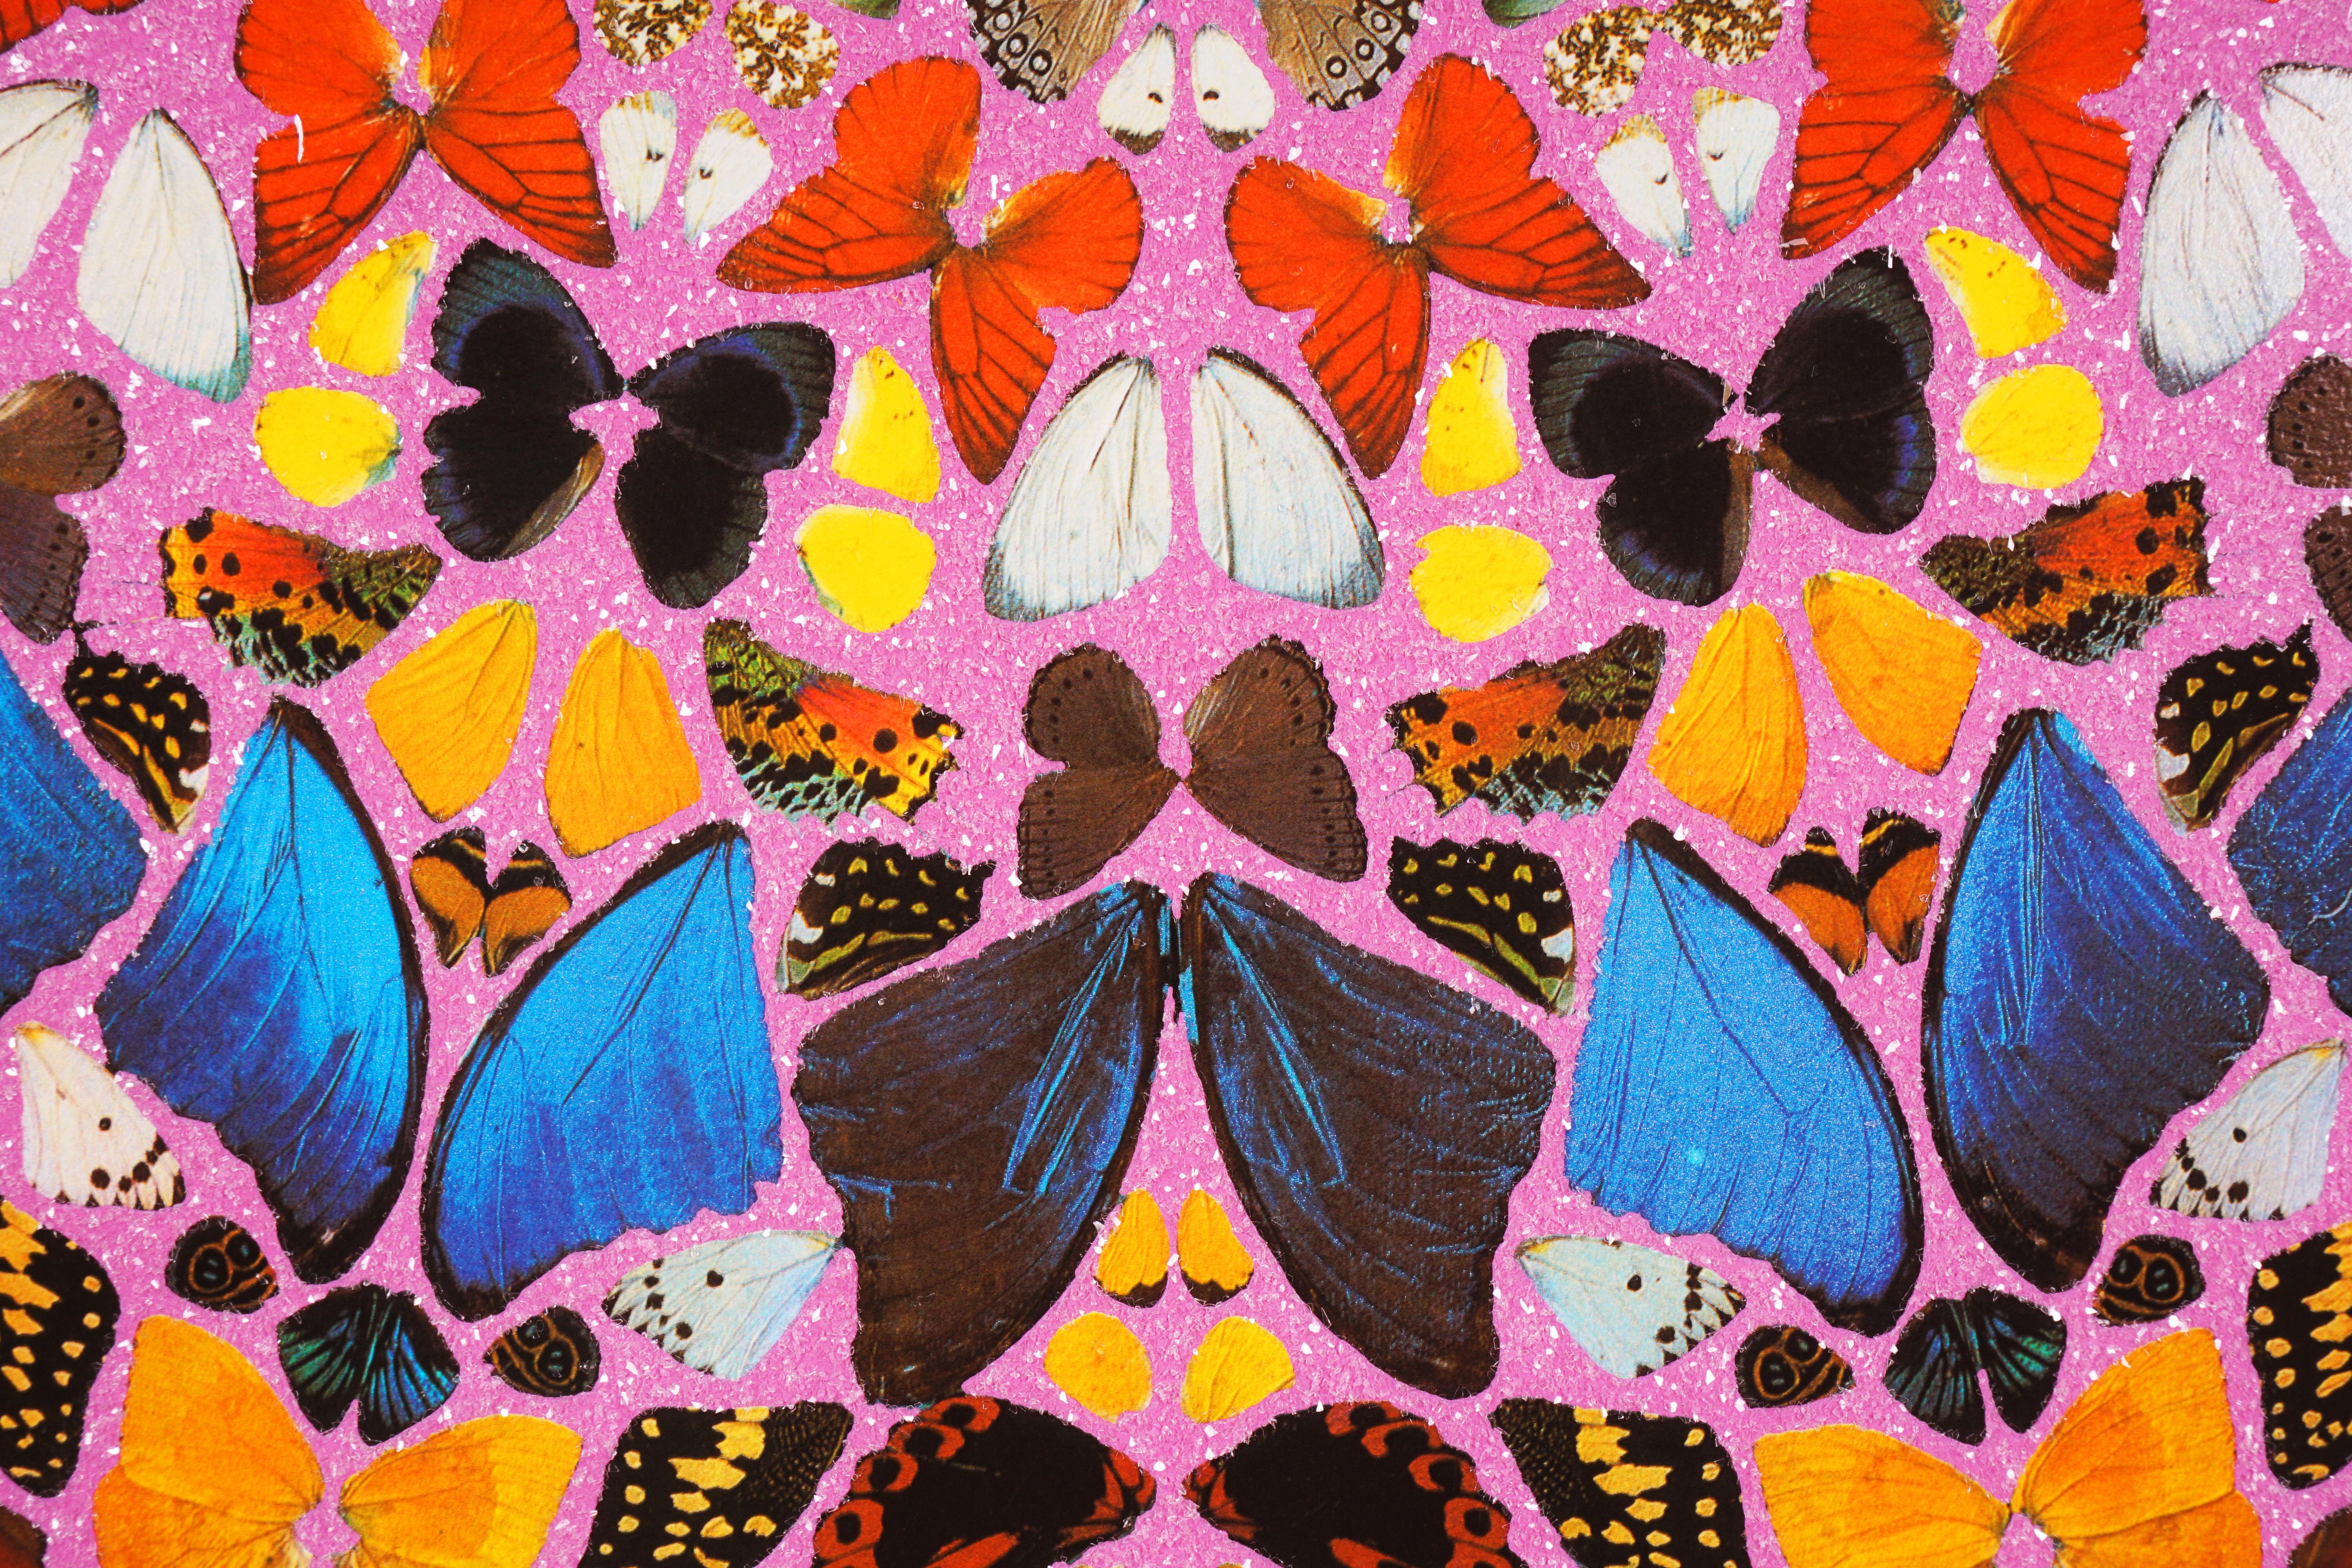 Pink Butterfly 'Cathedral Print, Palais des Papes' with Diamond Dust - Black Animal Print by Damien Hirst